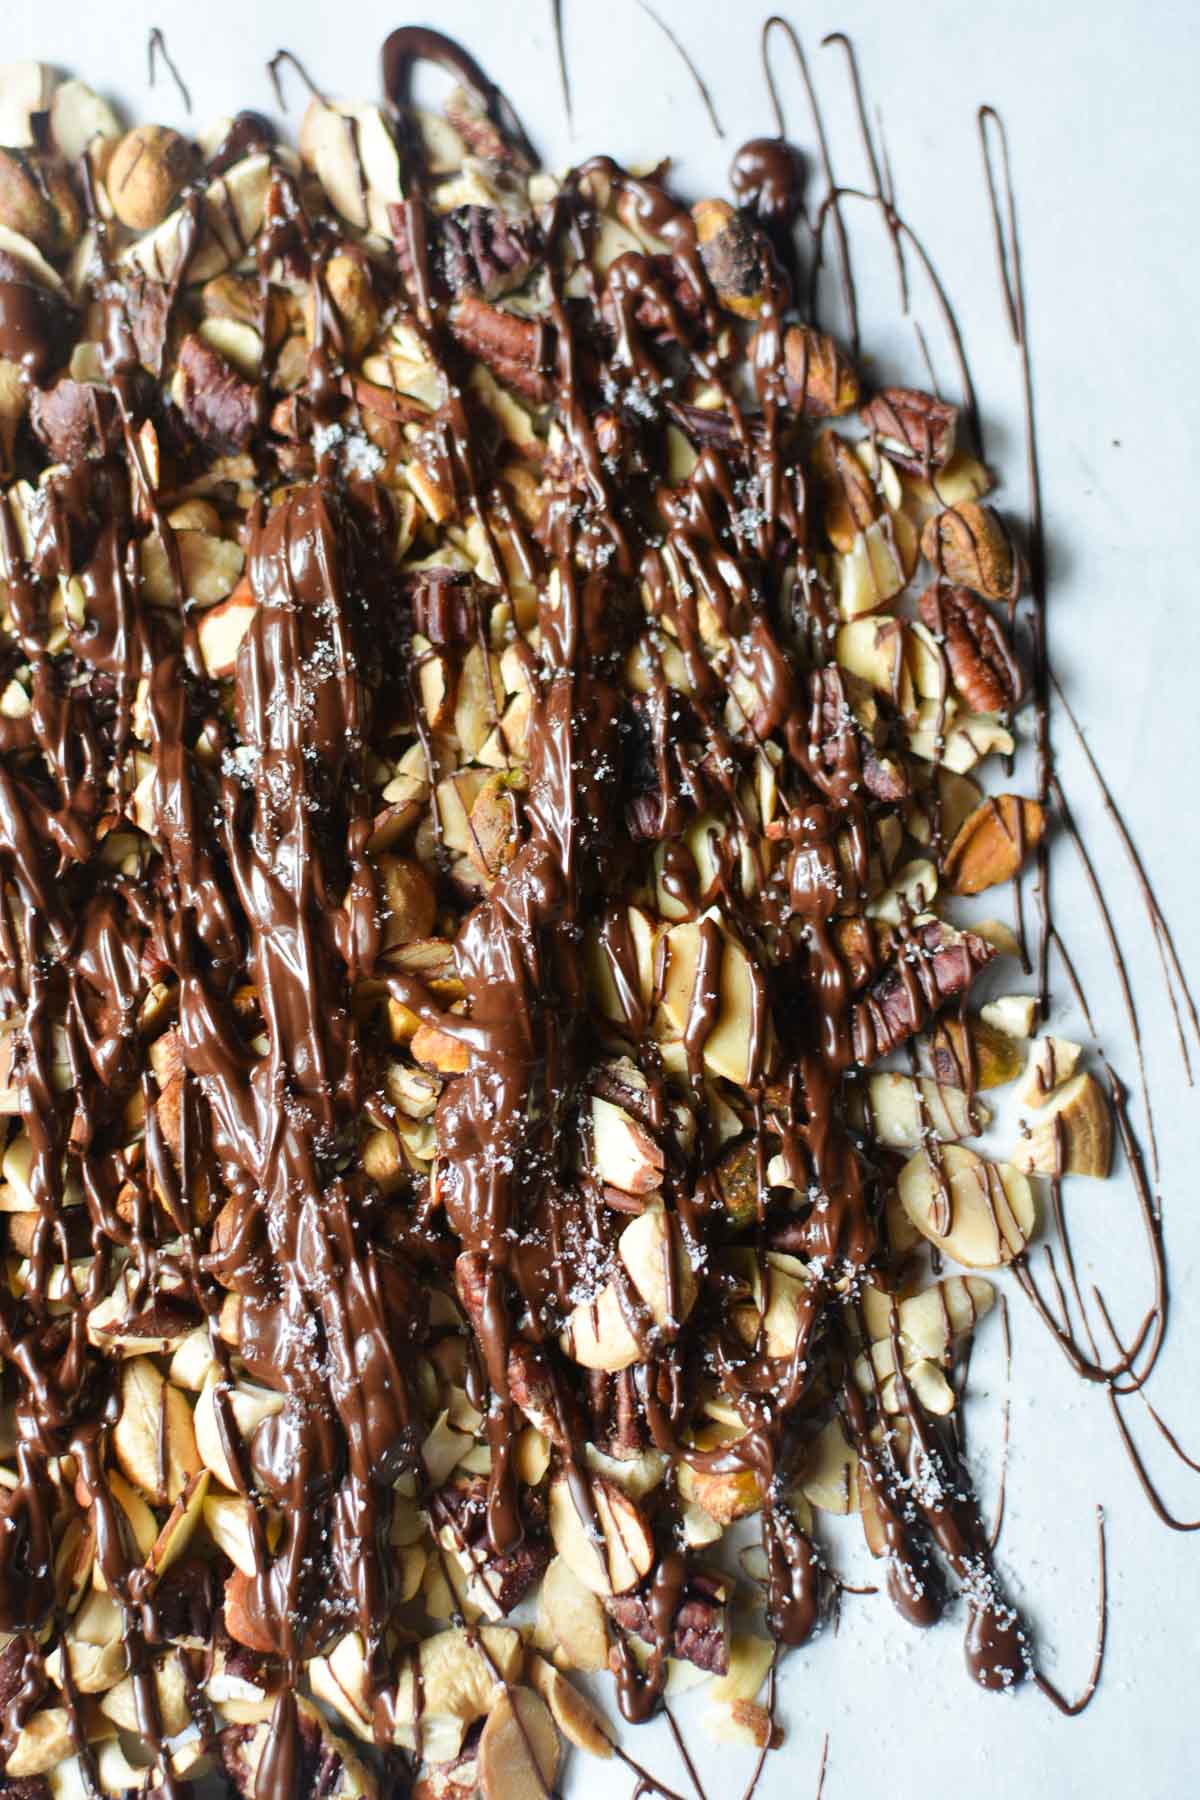 Chocolate drizzled mixed nuts on parchment paper